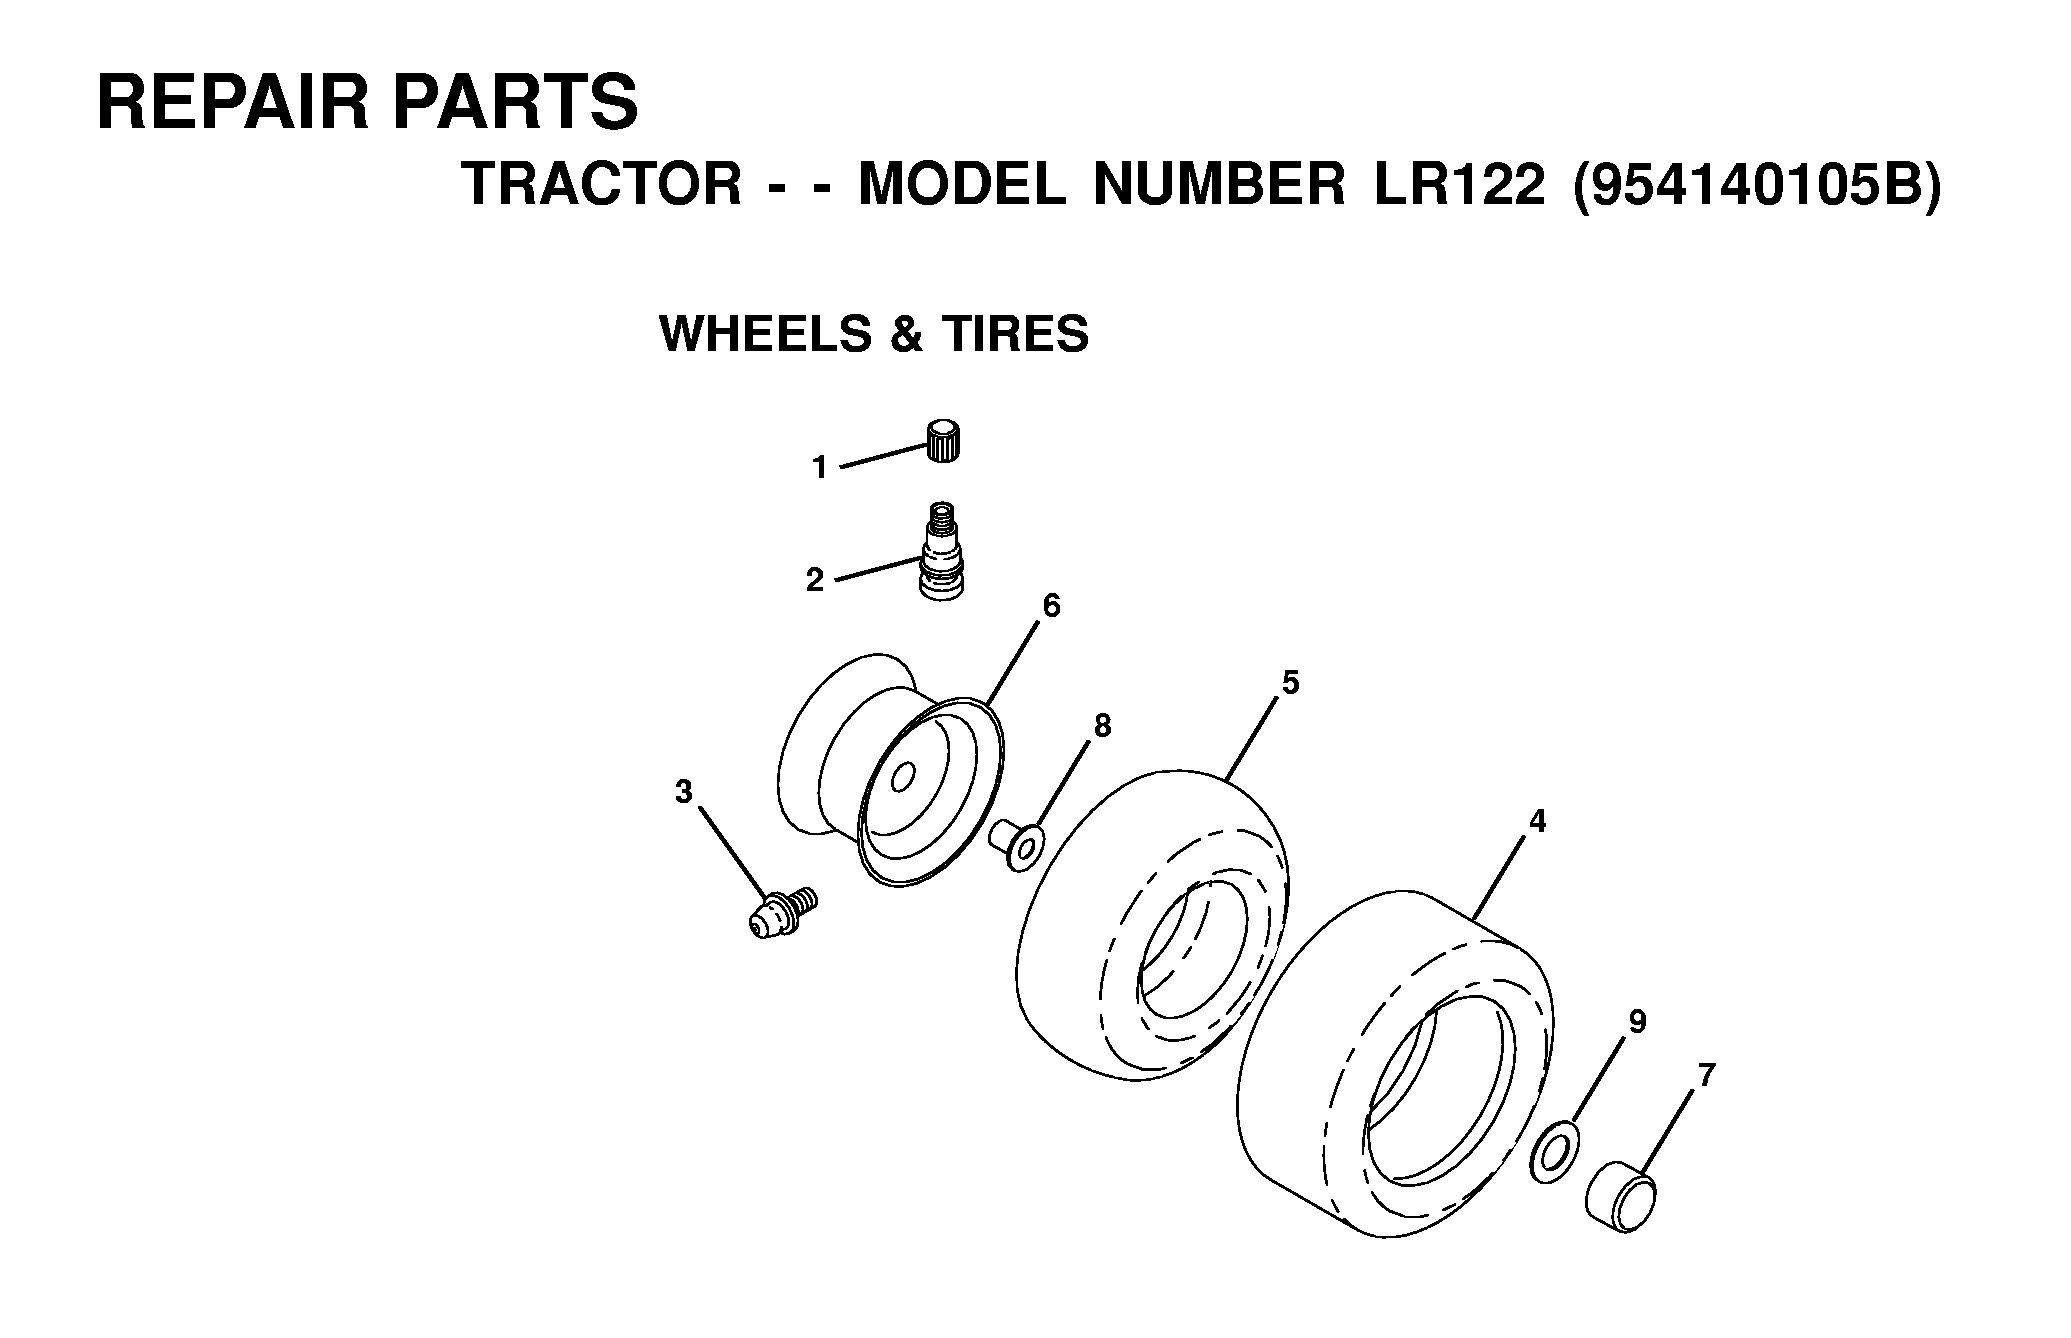 Wheels and tires 532059192, 532065139, 532000278, 532123410, 532106230, 532059904, 532008134, 532142039, 532141652, 532104757, 532009040, 532171039, 576707201